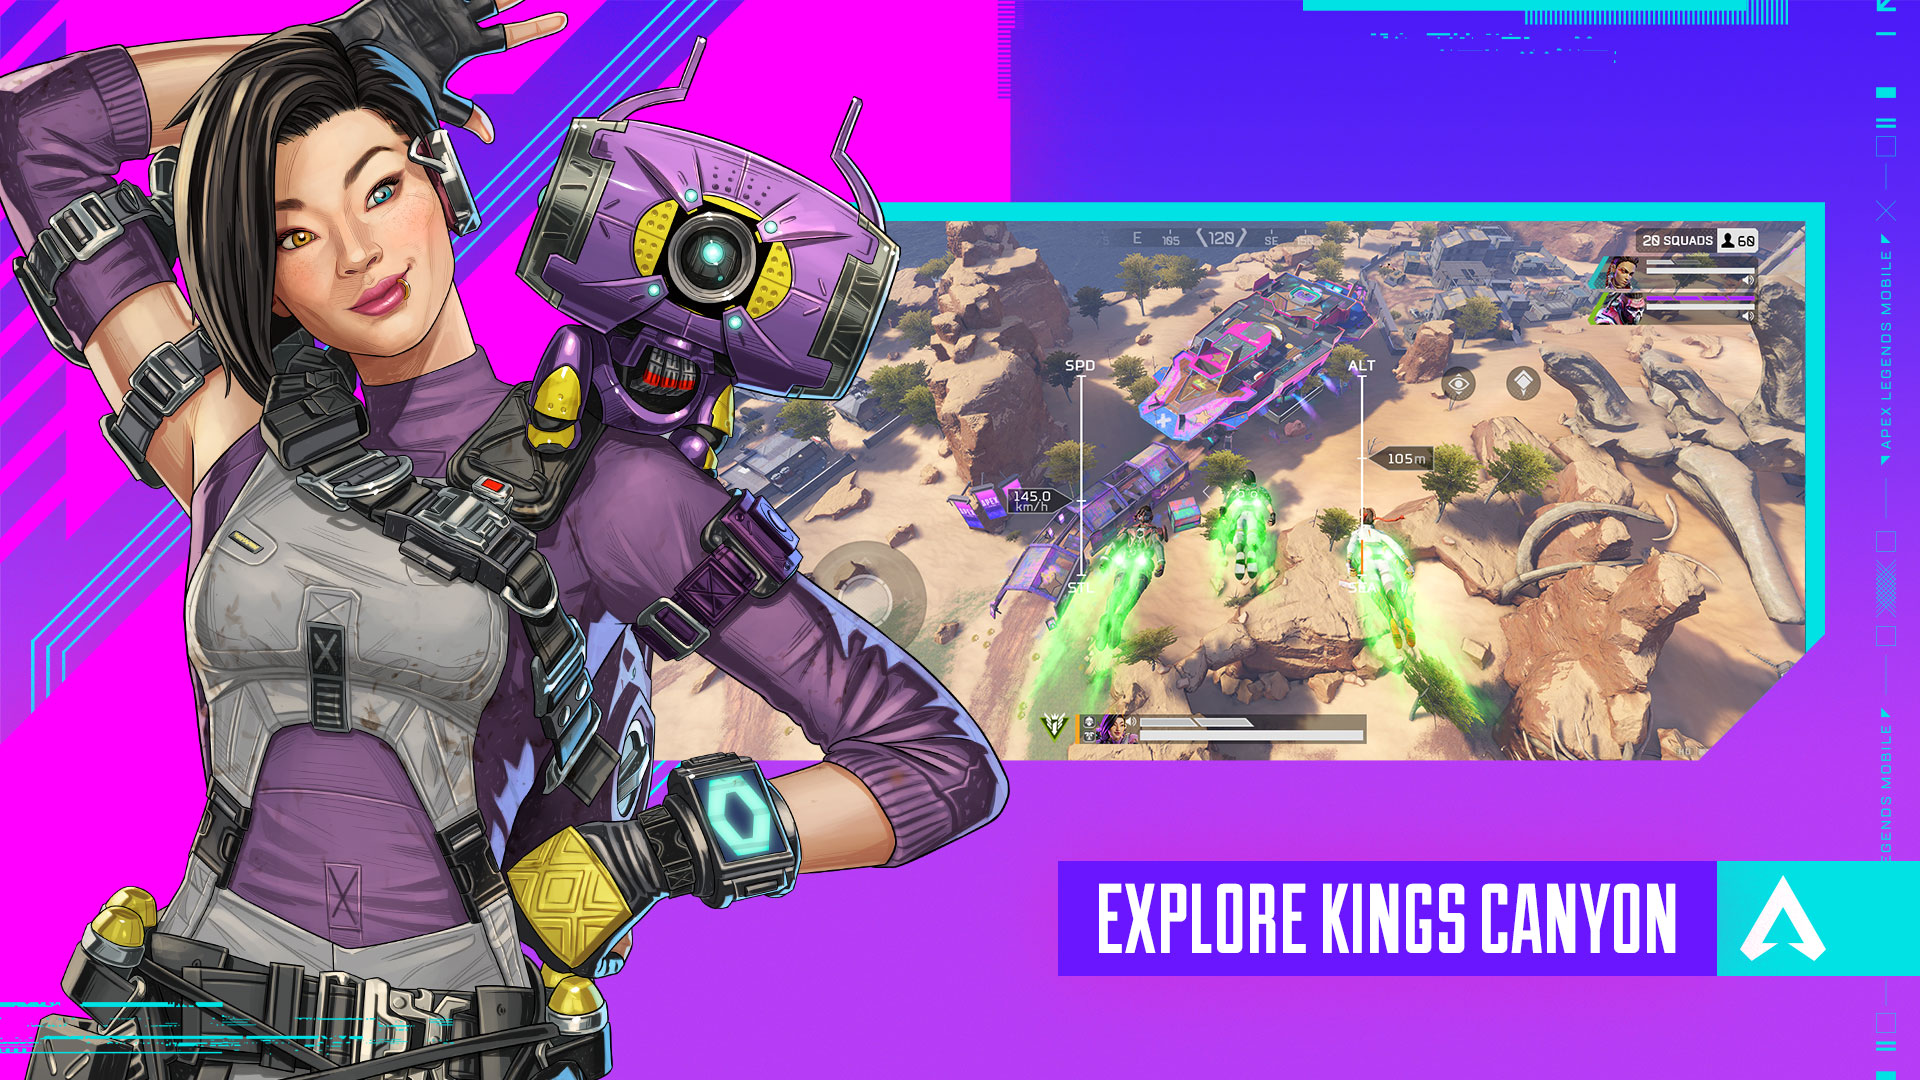 Apex Legends Mobile Reveals Aftershow Update Featuring New Events, Game Modes and More